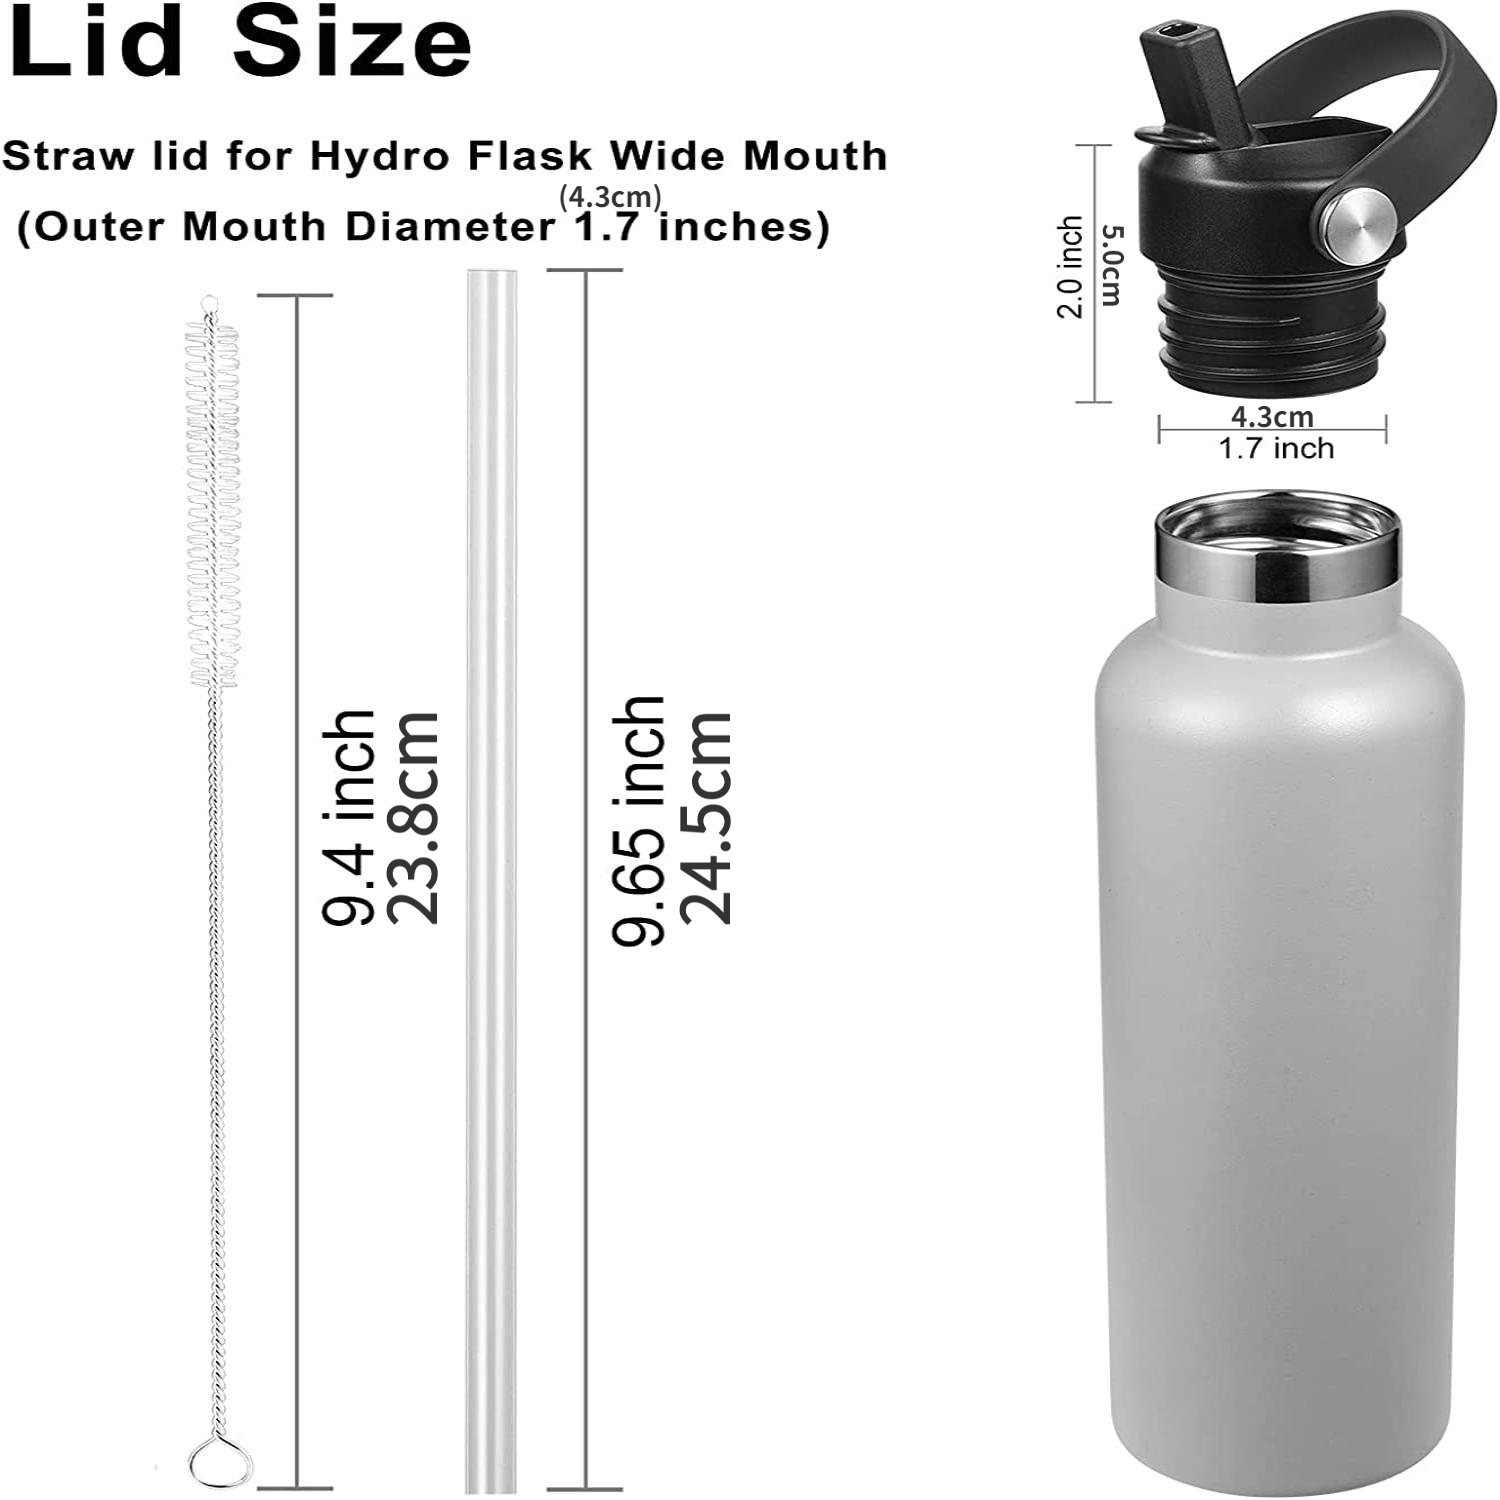 Straw Lid for Hydroflask Standard Mouth,Lid with Straws fit for